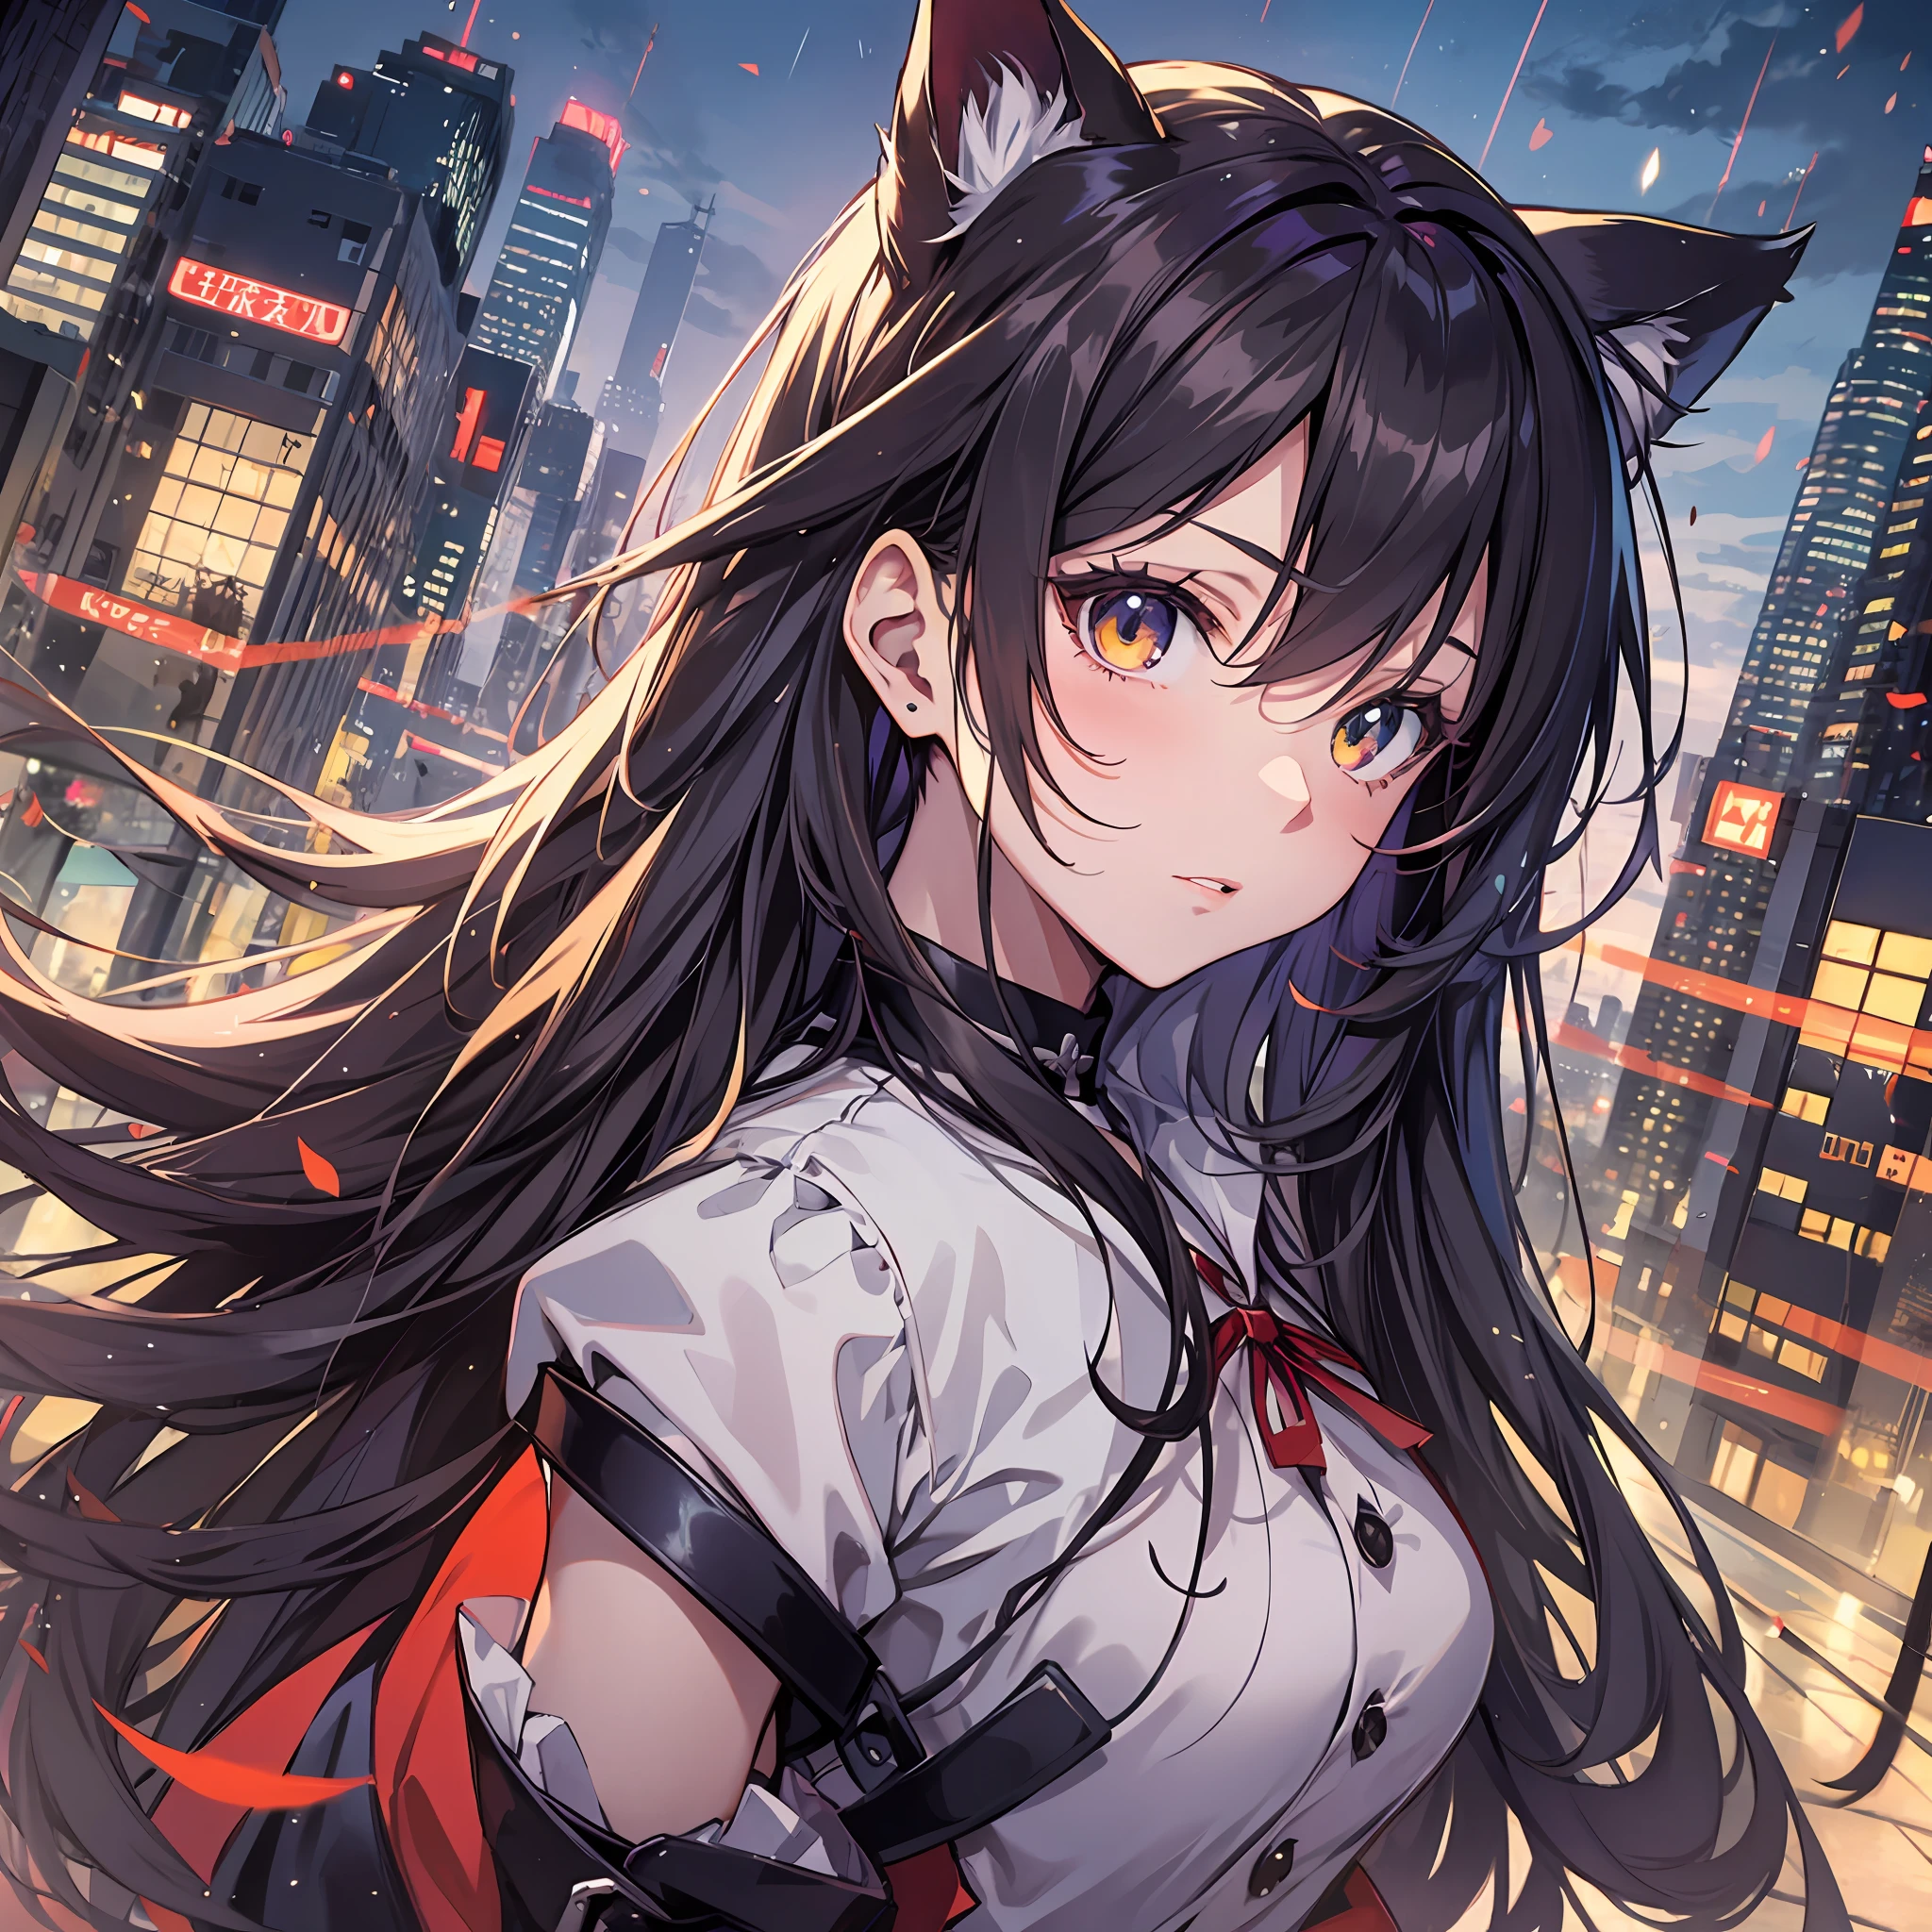 Best quality, 8K)) One woman anime girl with black long hair and cat ears, Rin Tohsaka, anime moe art style, anime style like Fate/stay night, anime girl with long hair, very cute anime girl face, night core, from the front line of girls, cute anime girl portrait, anime girl with cat ears, High Quality Anime Art Style, Beautiful Anime Women Sexy Beauty Underarm Beautiful Abs